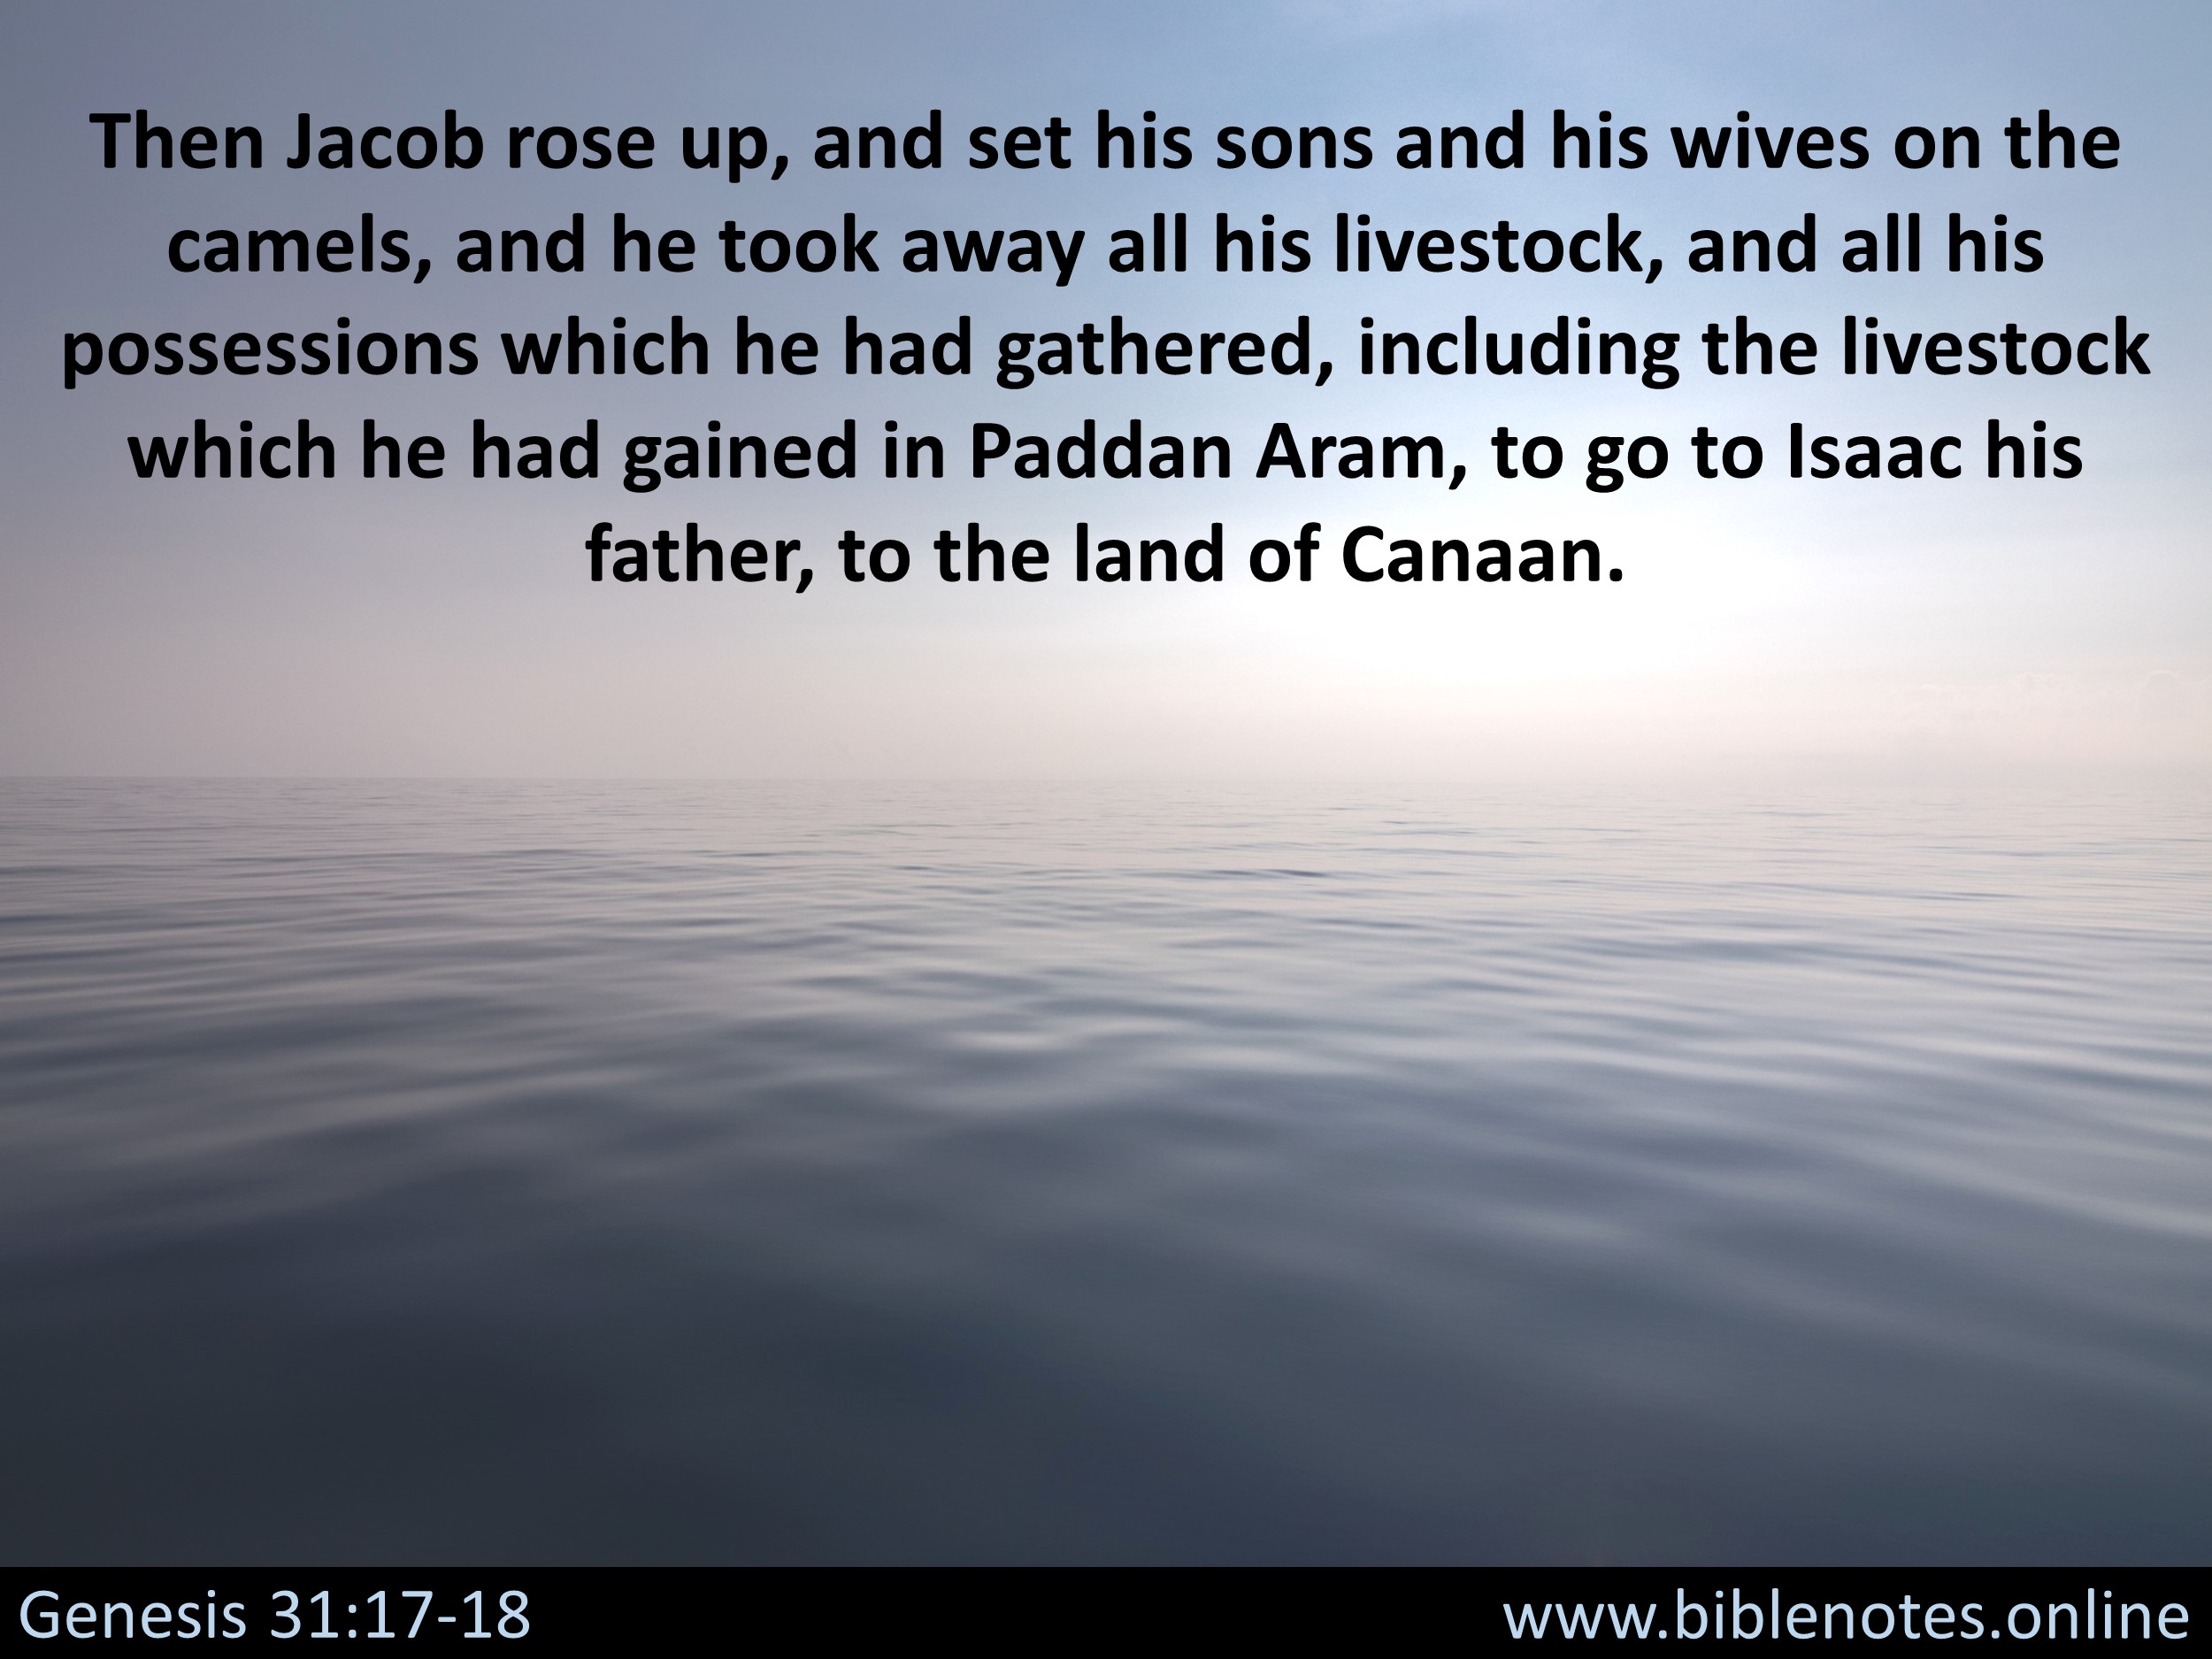 Bible Verse from Genesis Chapter 31